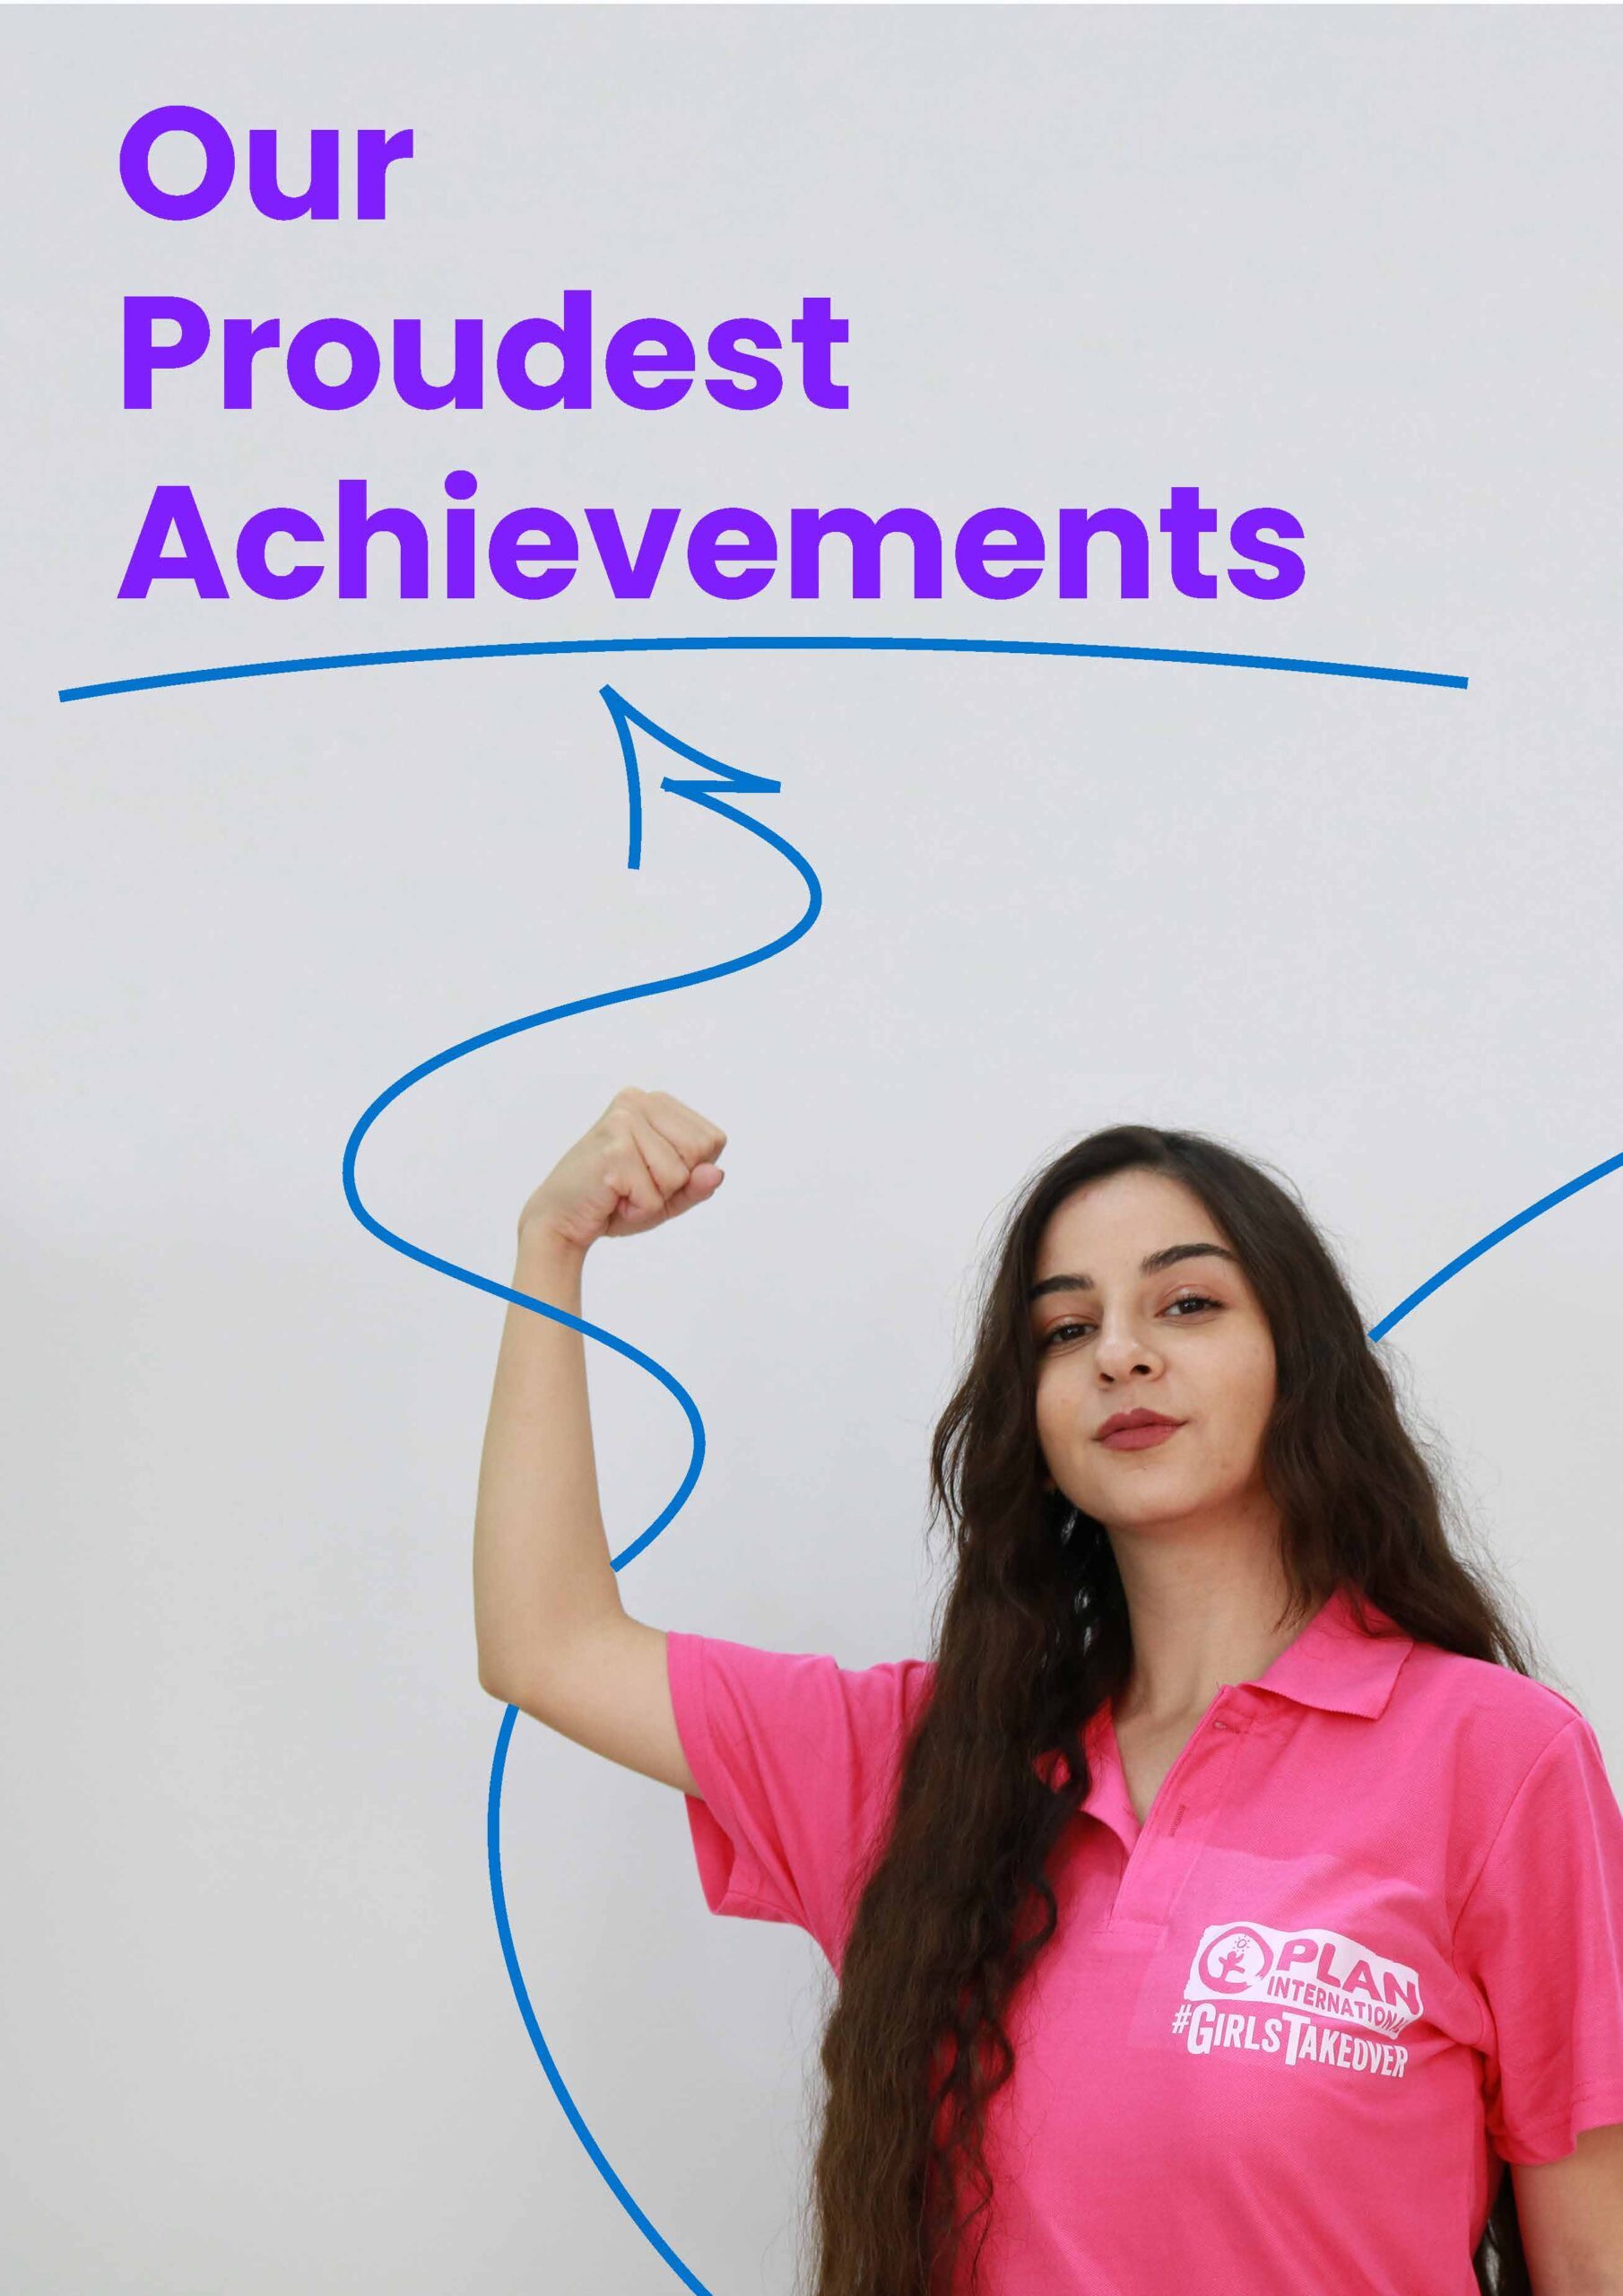 A young woman wearing a pink t-shirt looking proud.